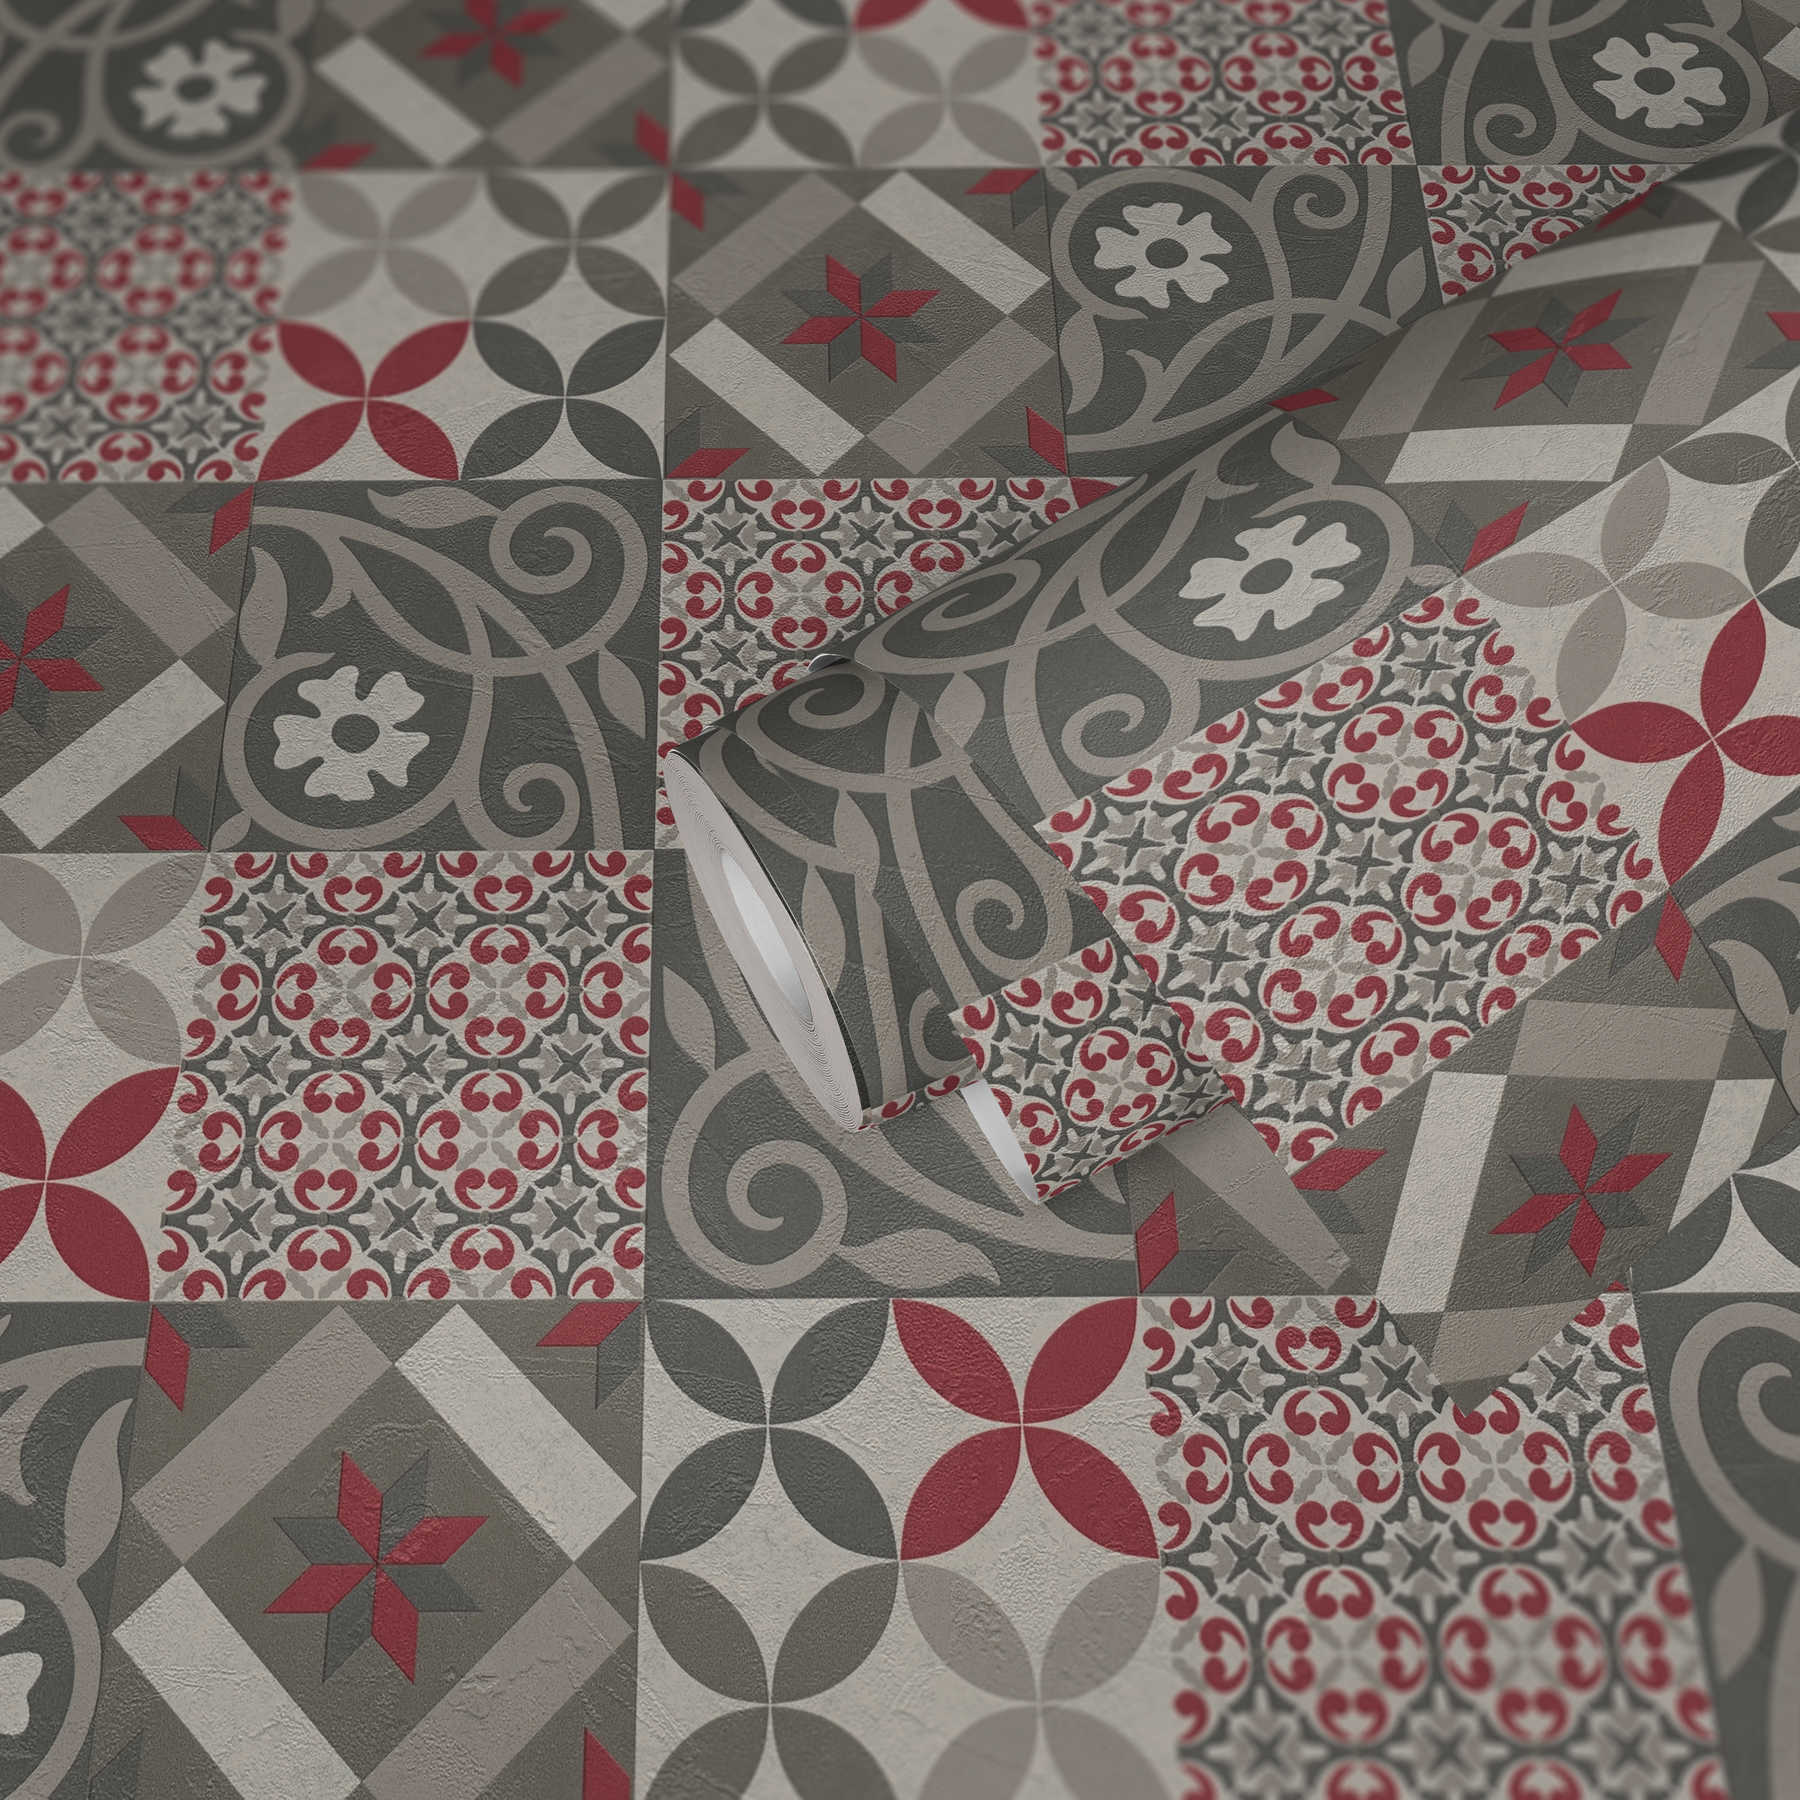             Wallpaper Decor tiles with floral pattern - black, red, anthracite
        